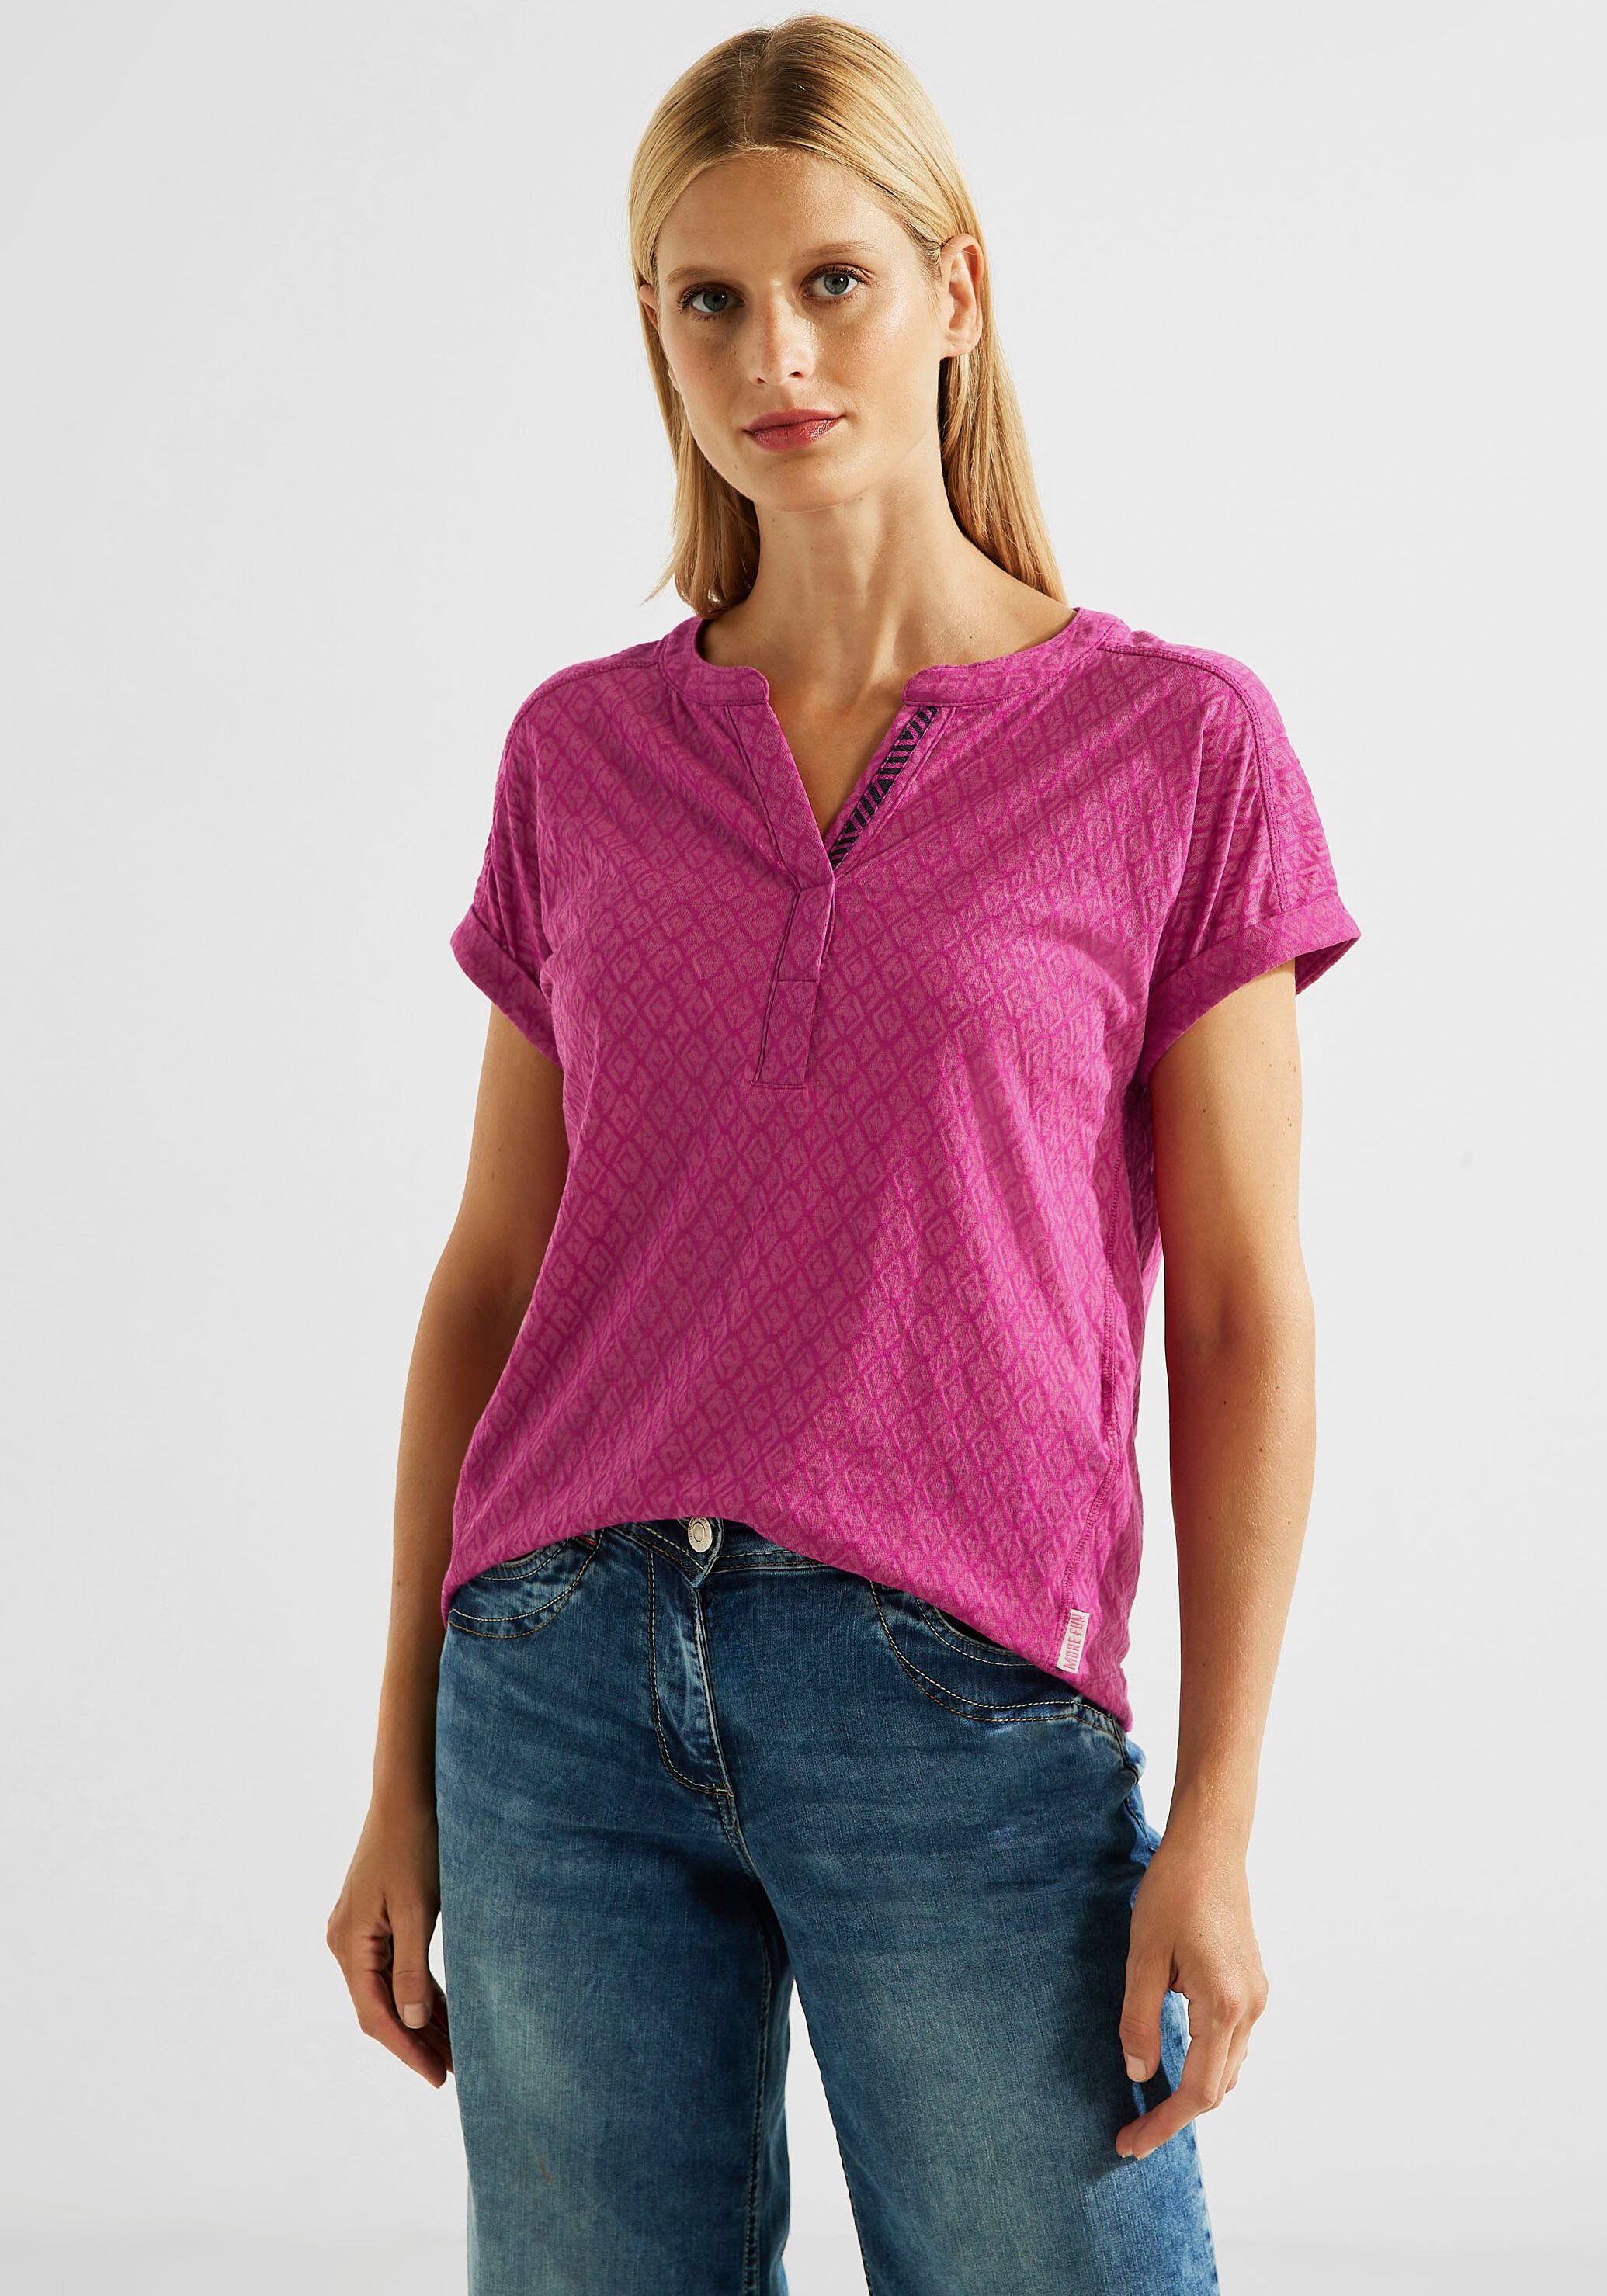 Allover-Muster pink Rhombusform T-Shirt mit in cool Cecil